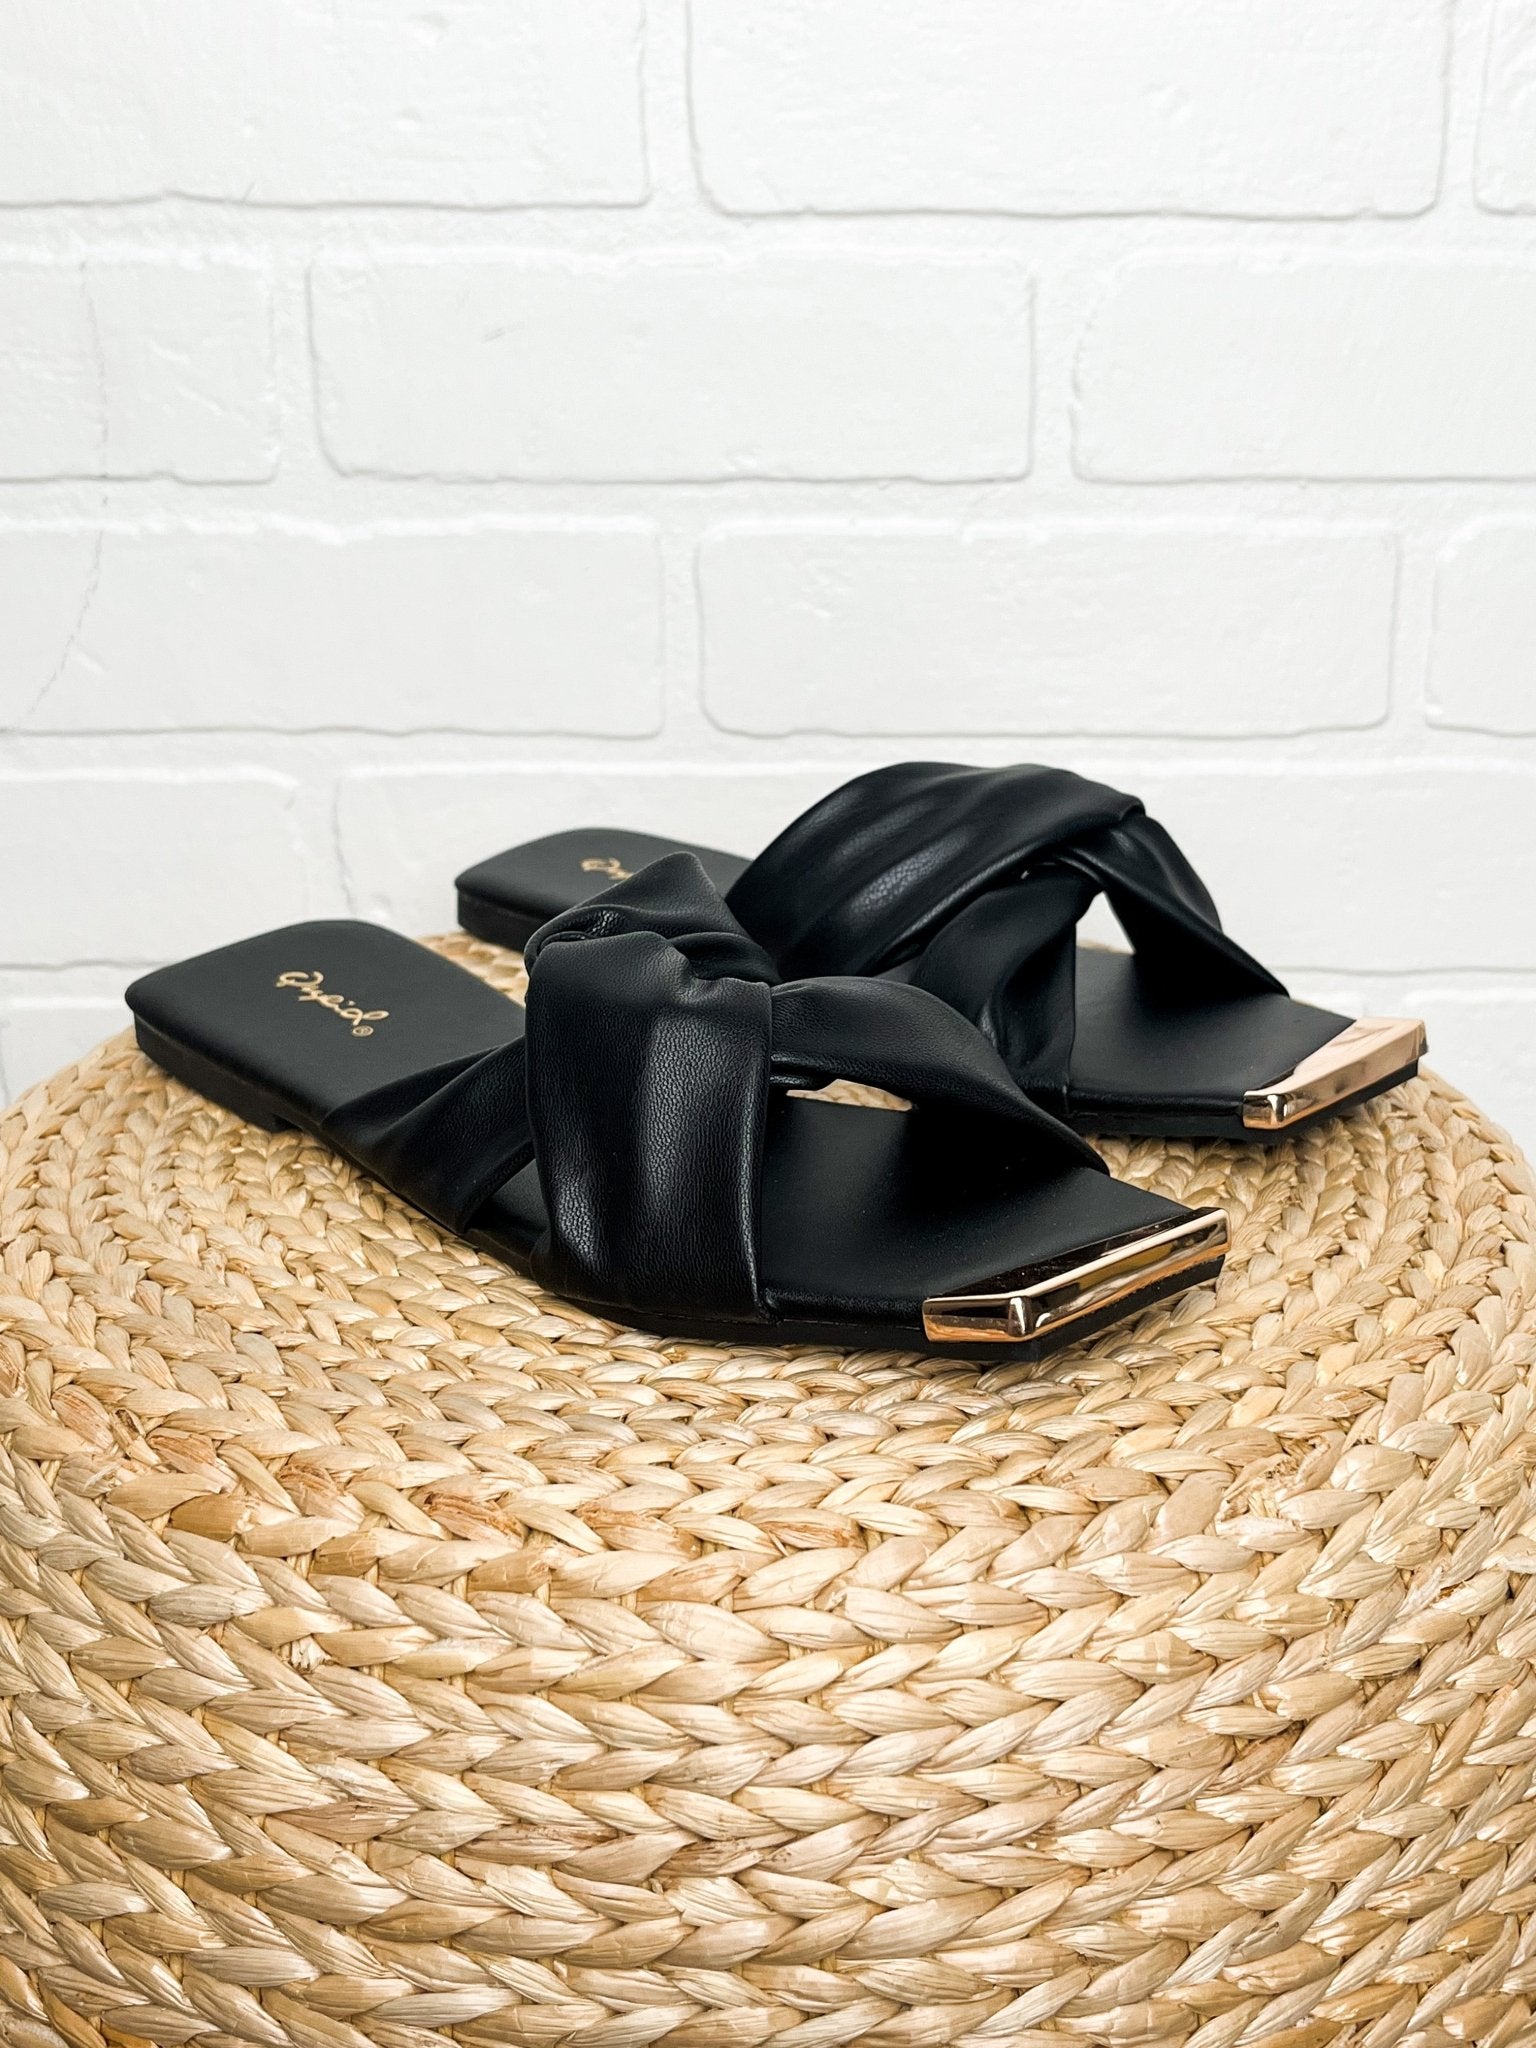 Aster ruched cross sandal black - Trendy shoes - Fashion Shoes at Lush Fashion Lounge Boutique in Oklahoma City